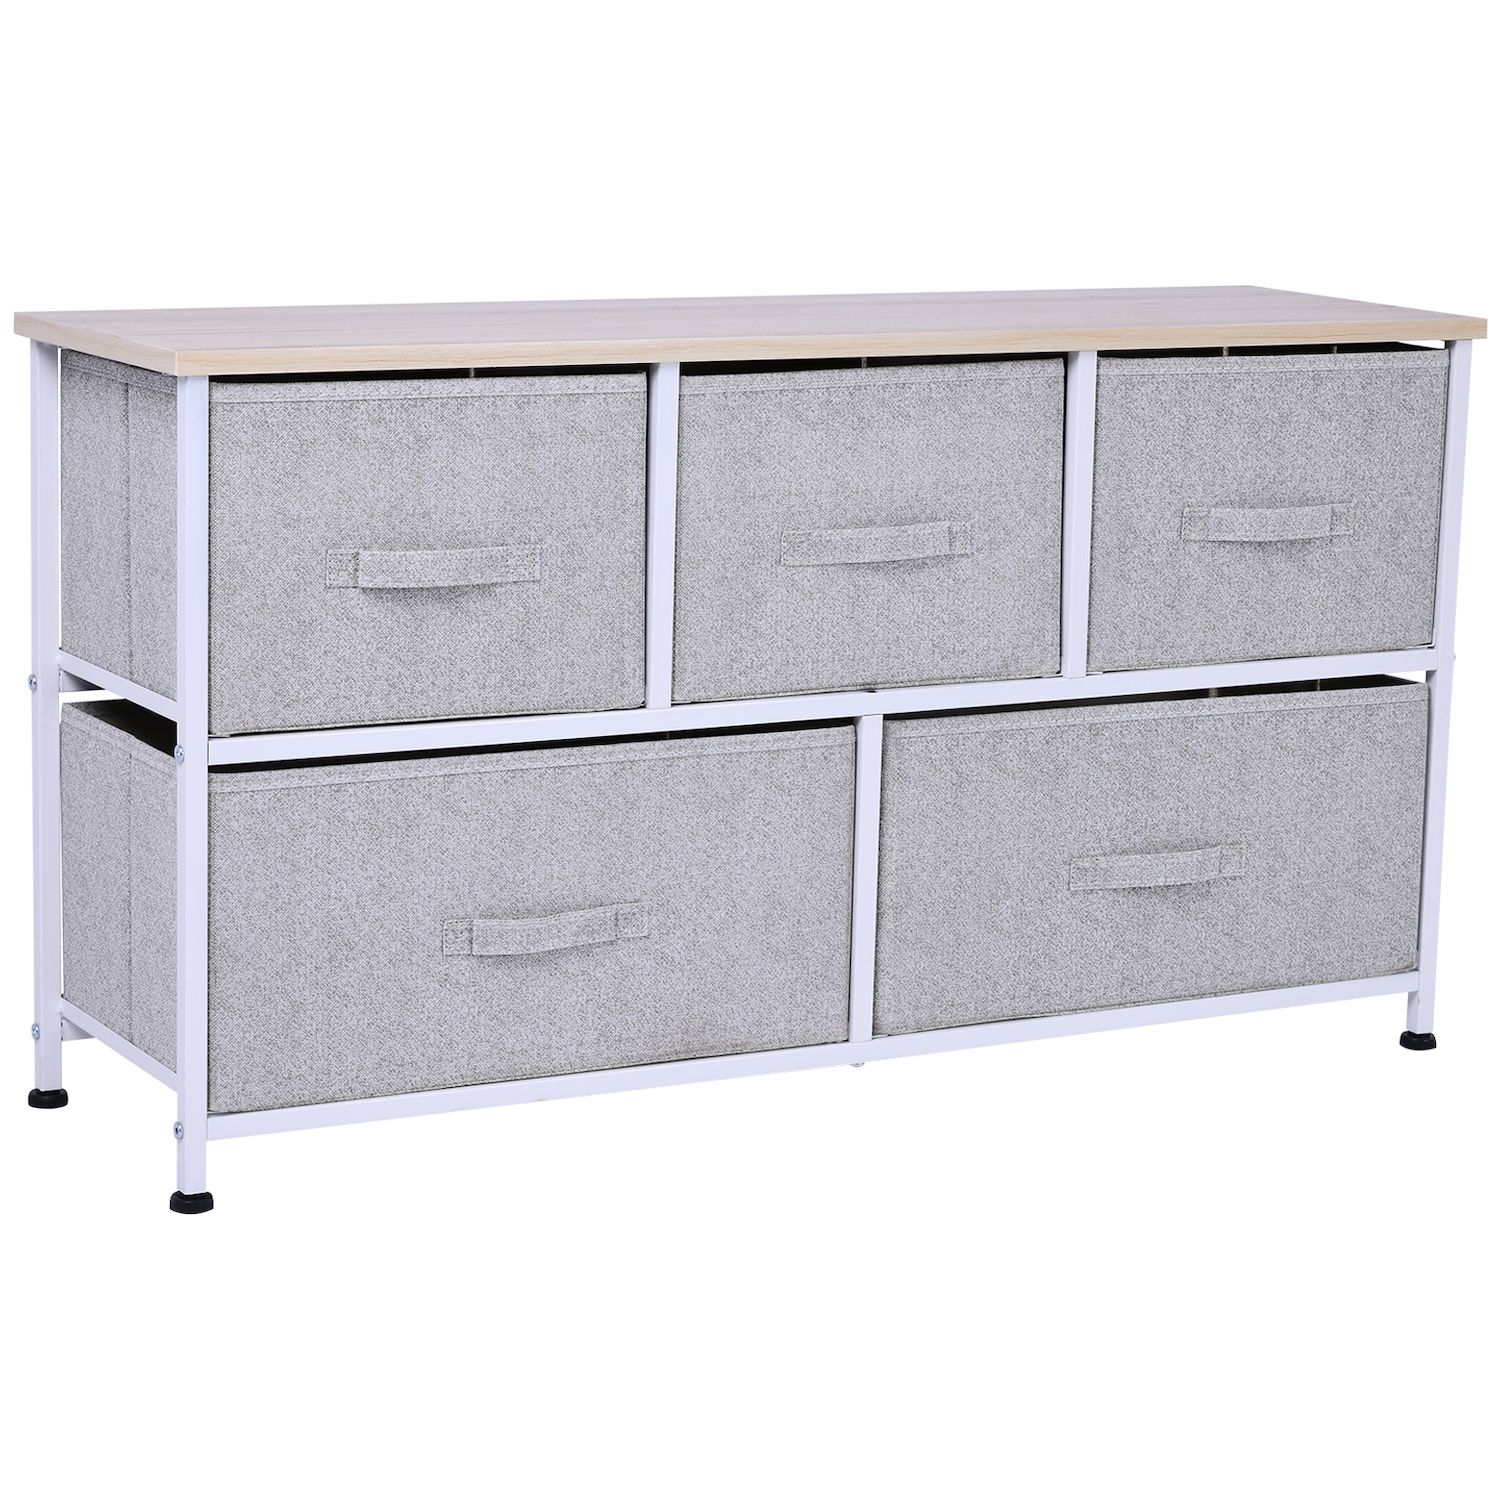 Emma + Oliver 2 Drawer Storage Stand with White Wood Top & Light Gray Fabric Pull Drawers